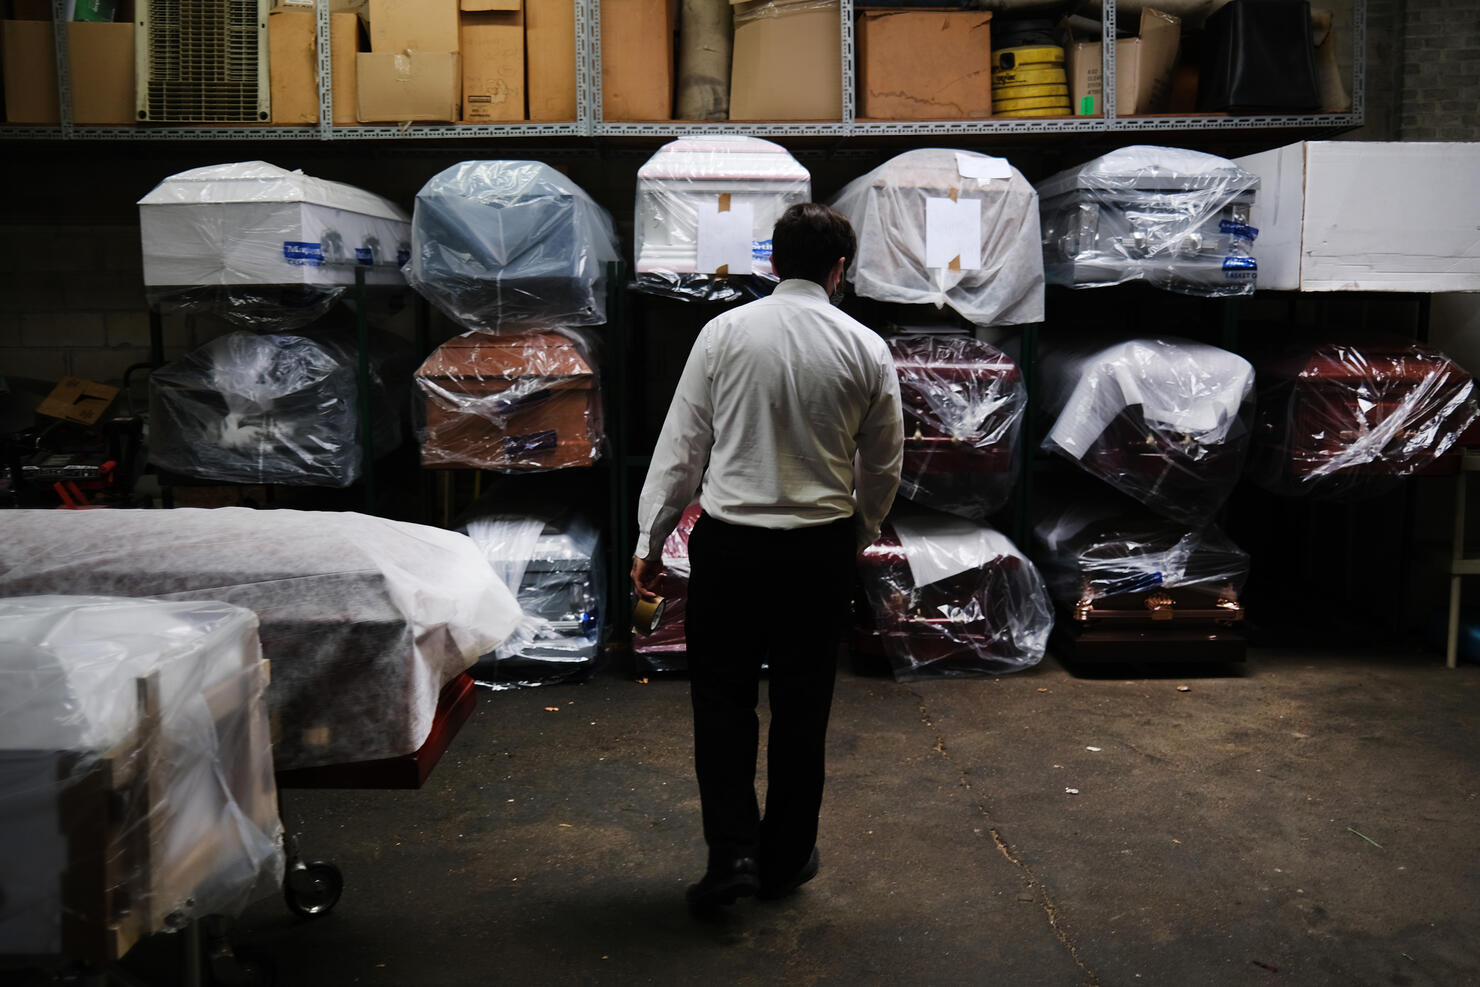 Funeral Home In New York Experiences Surge Of Deaths Amid Coronavirus Pandemic